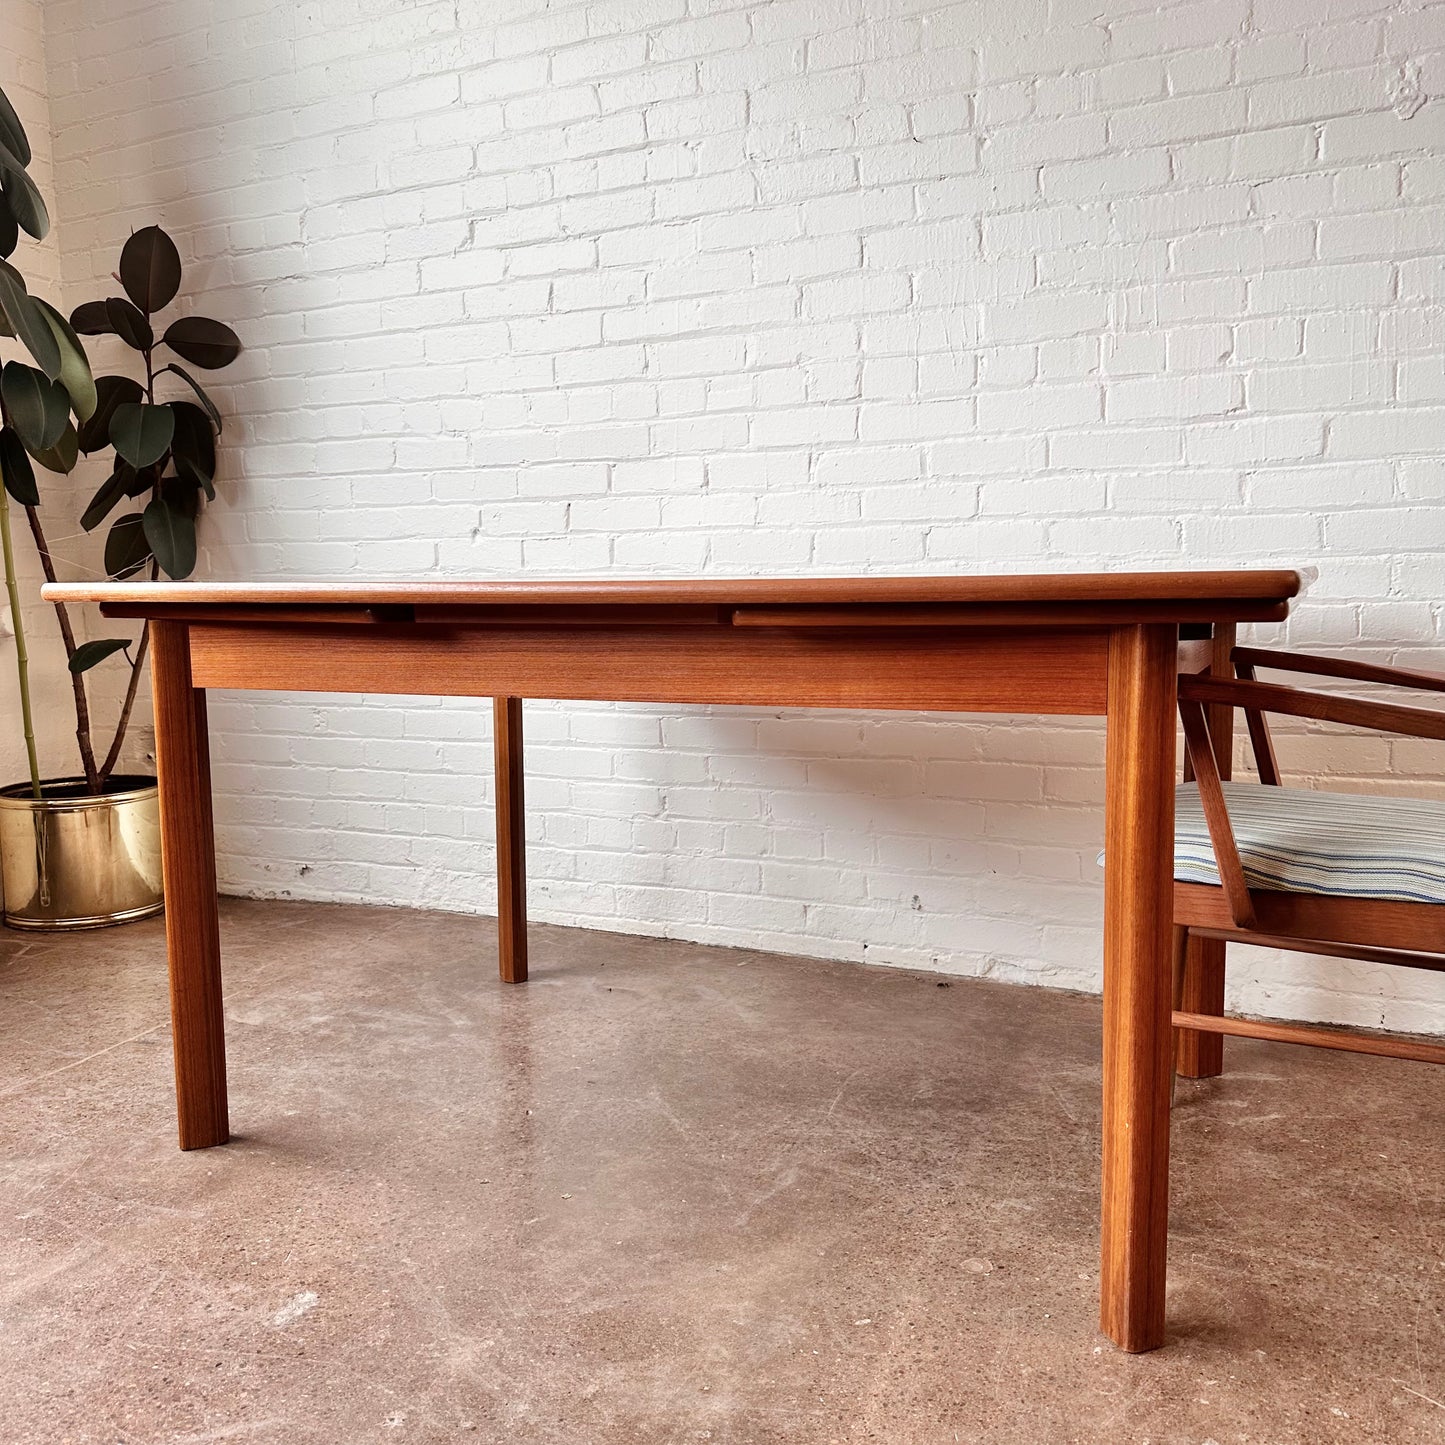 RESTORED BOAT-SHAPE TEAK DINING TABLE WITH EXTENSIONS